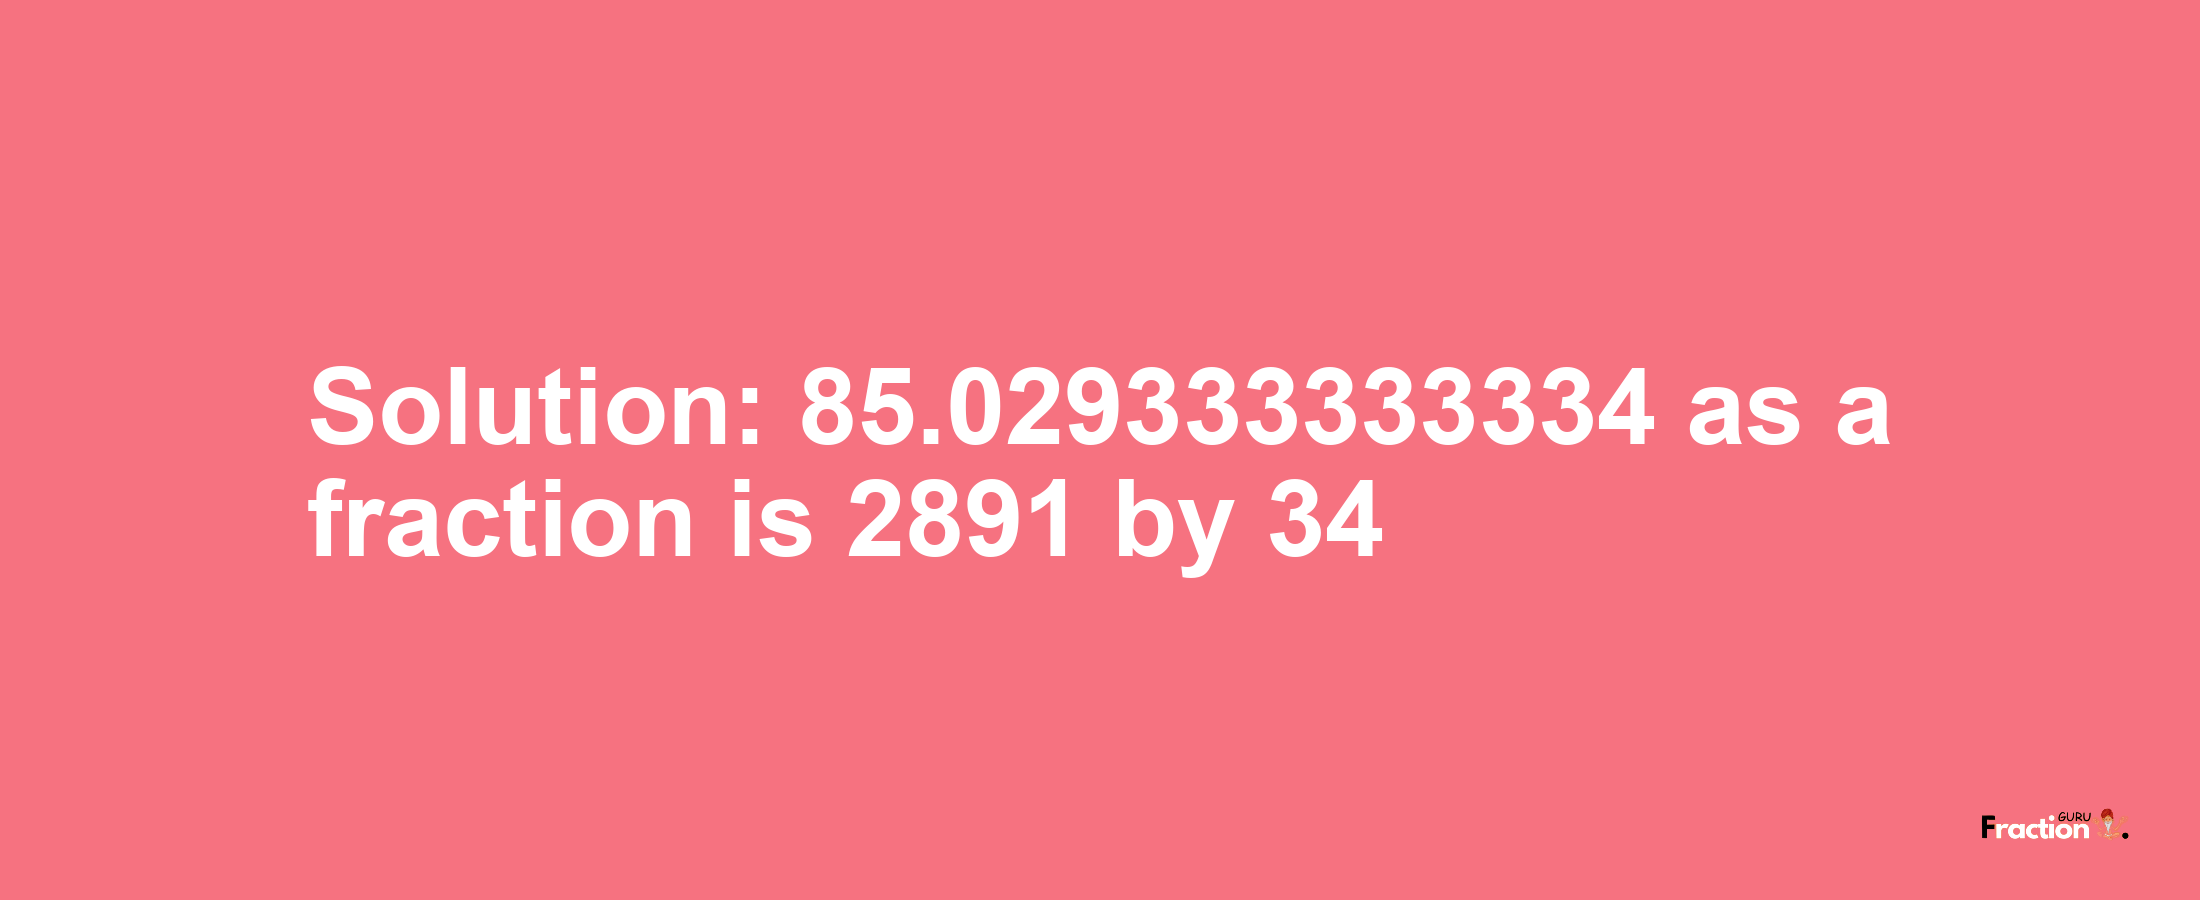 Solution:85.029333333334 as a fraction is 2891/34